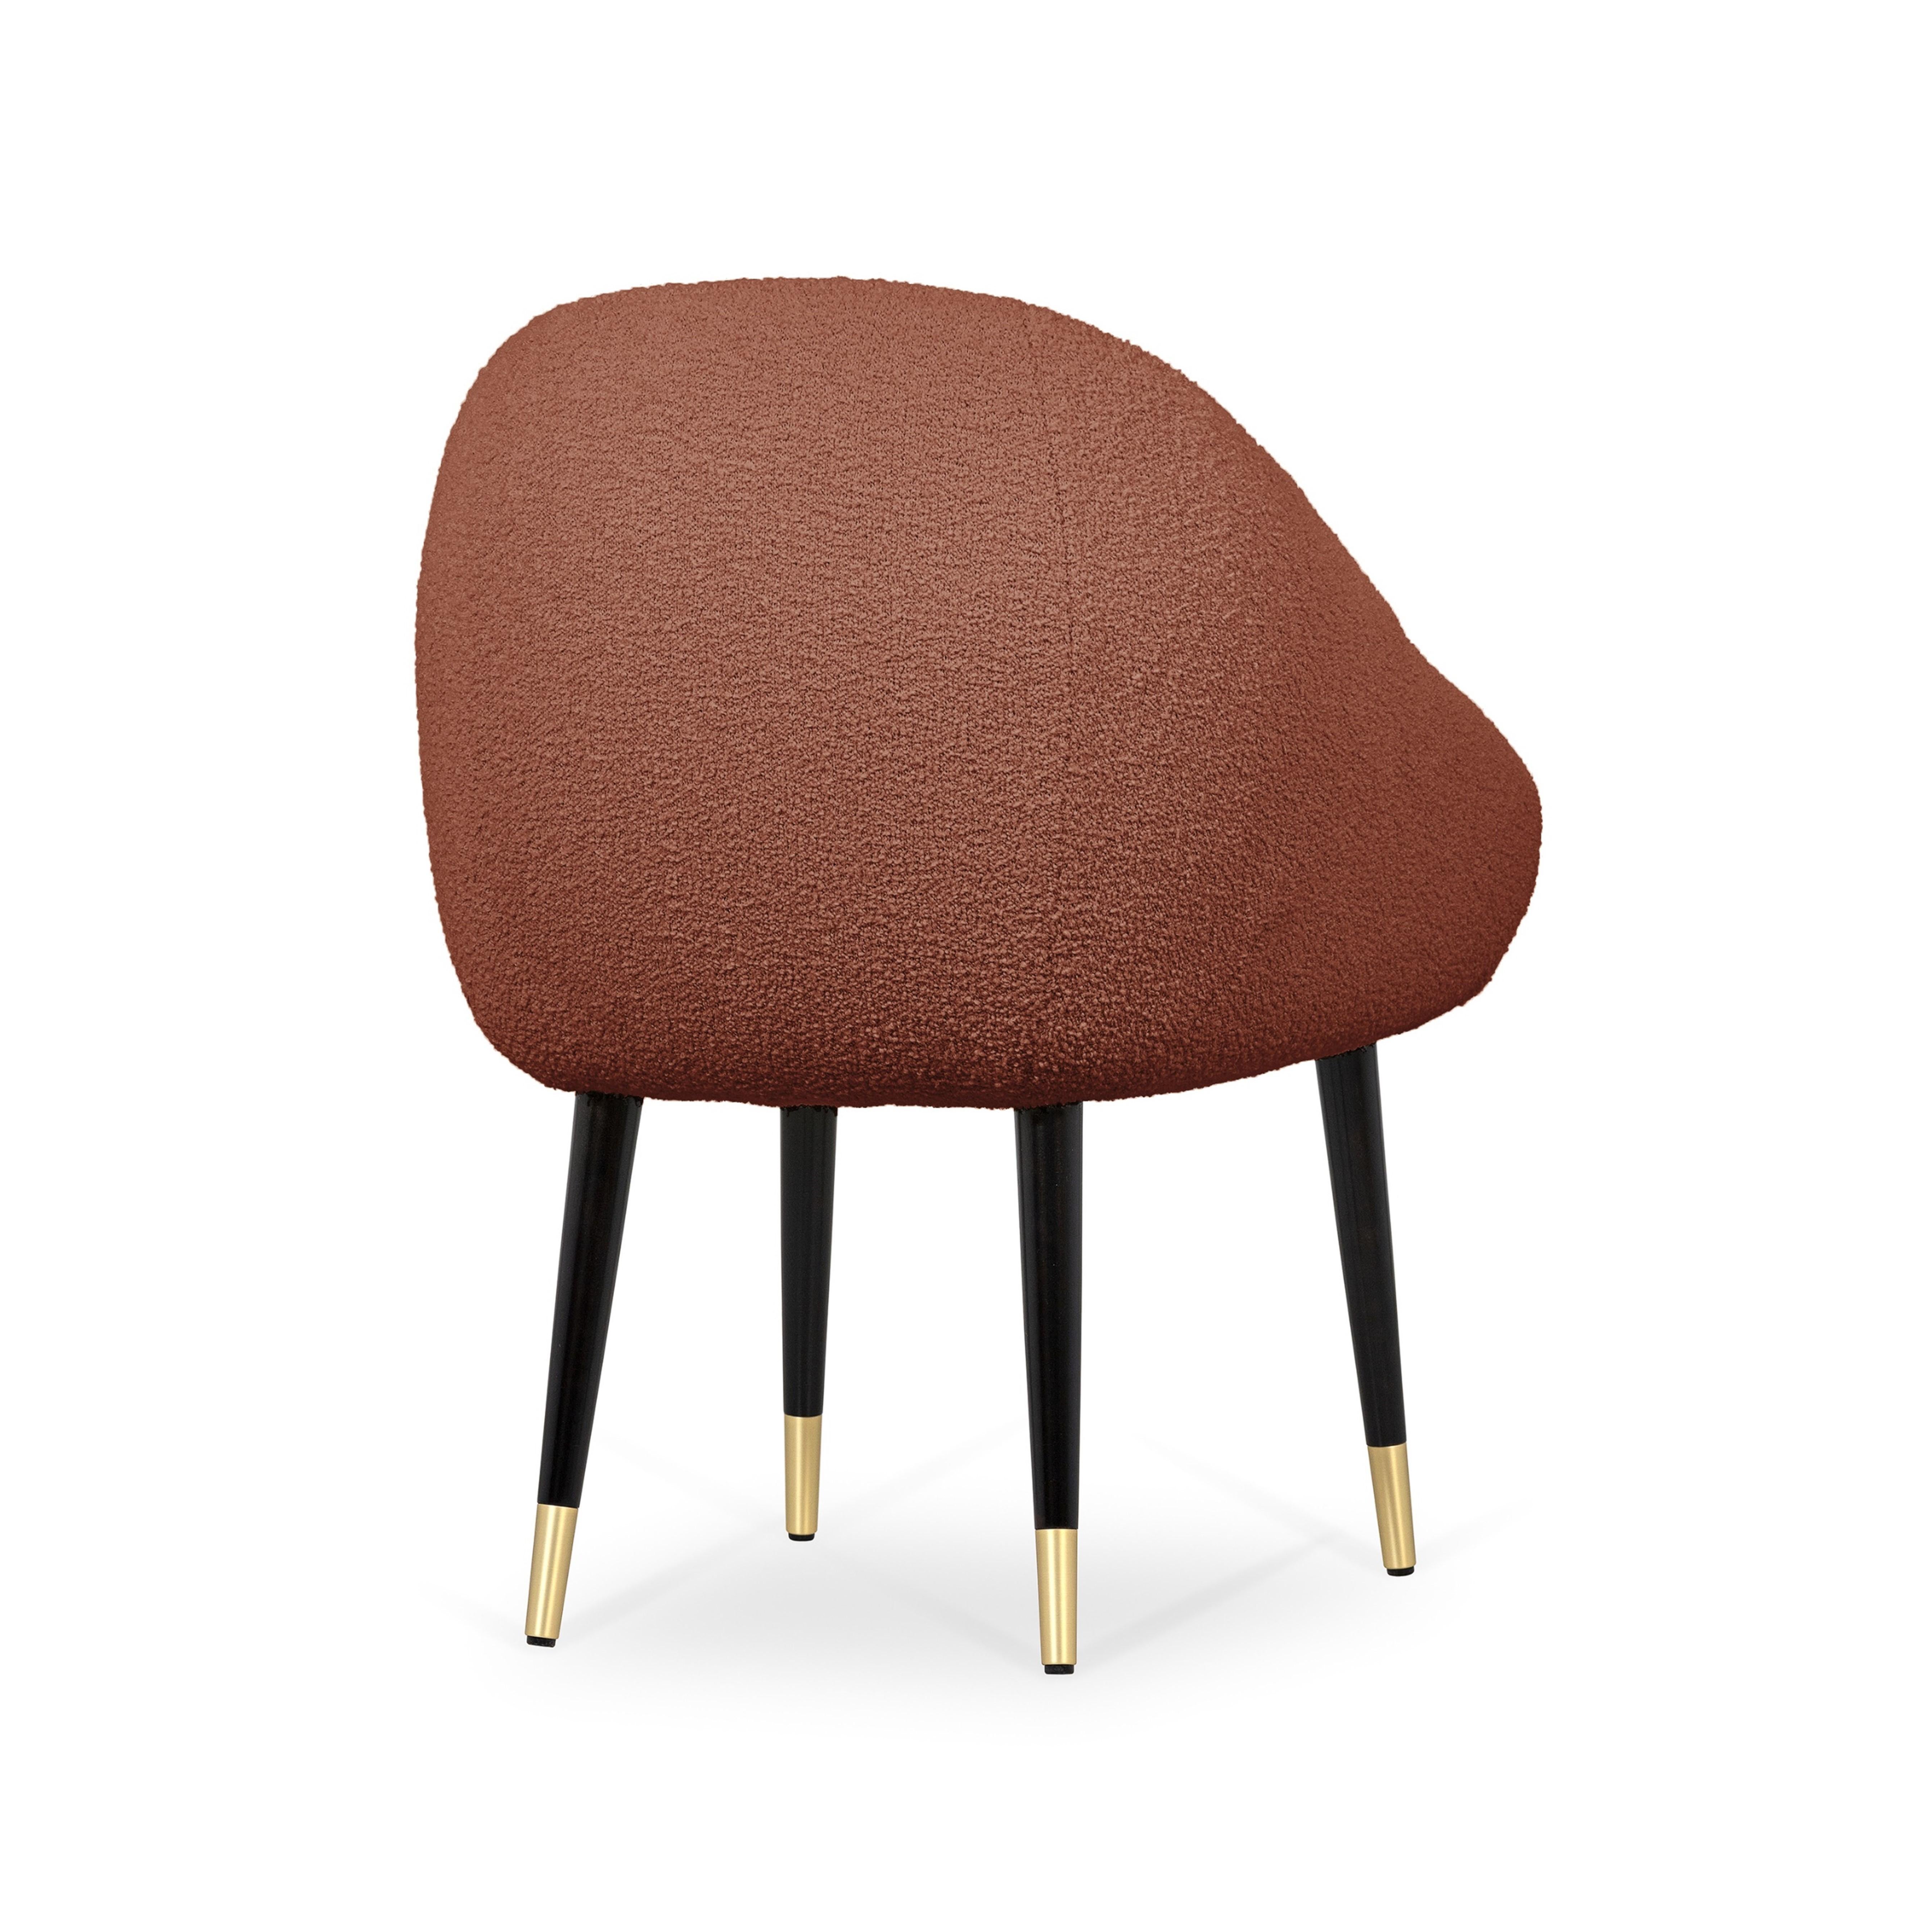 Brushed Niemeyer Dining Chair, Bouclé and Brass, Insidherland by Joana Santos Barbosa For Sale